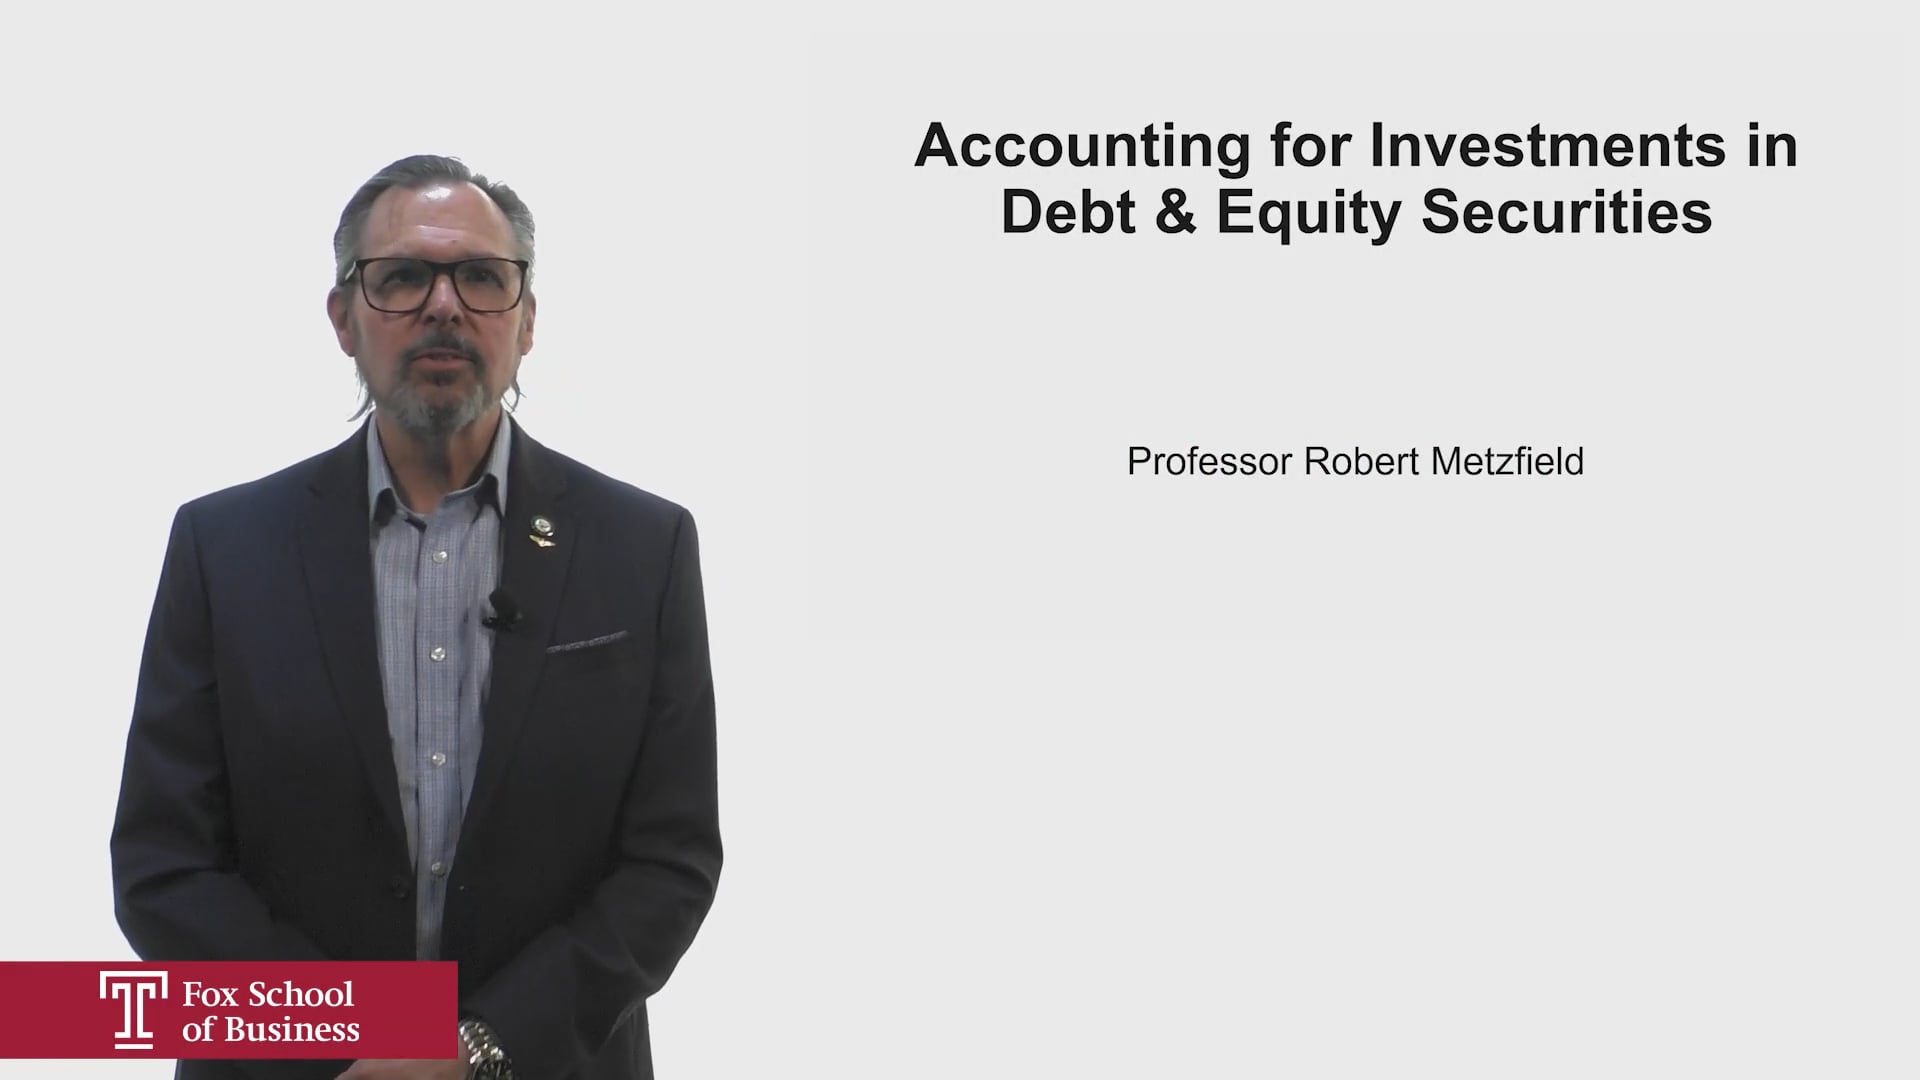 Accounting for Investments in Debt & Equity Securities